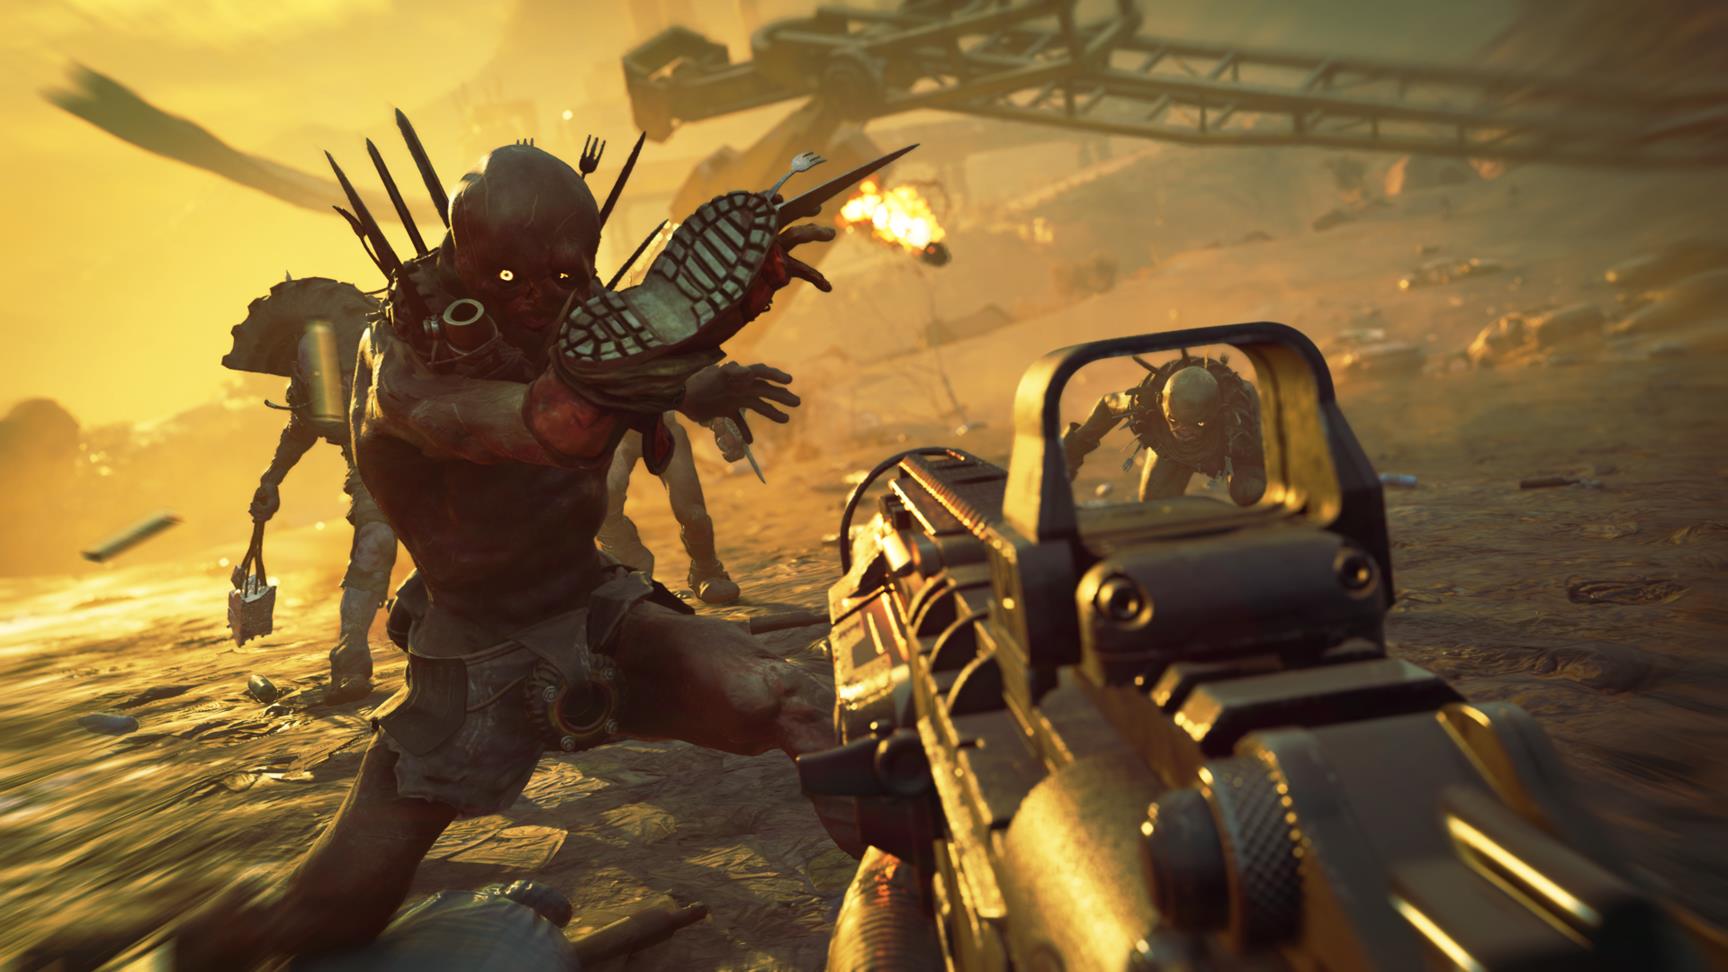 Image for Rage 2 is coming in 2019, watch the first gameplay trailer here